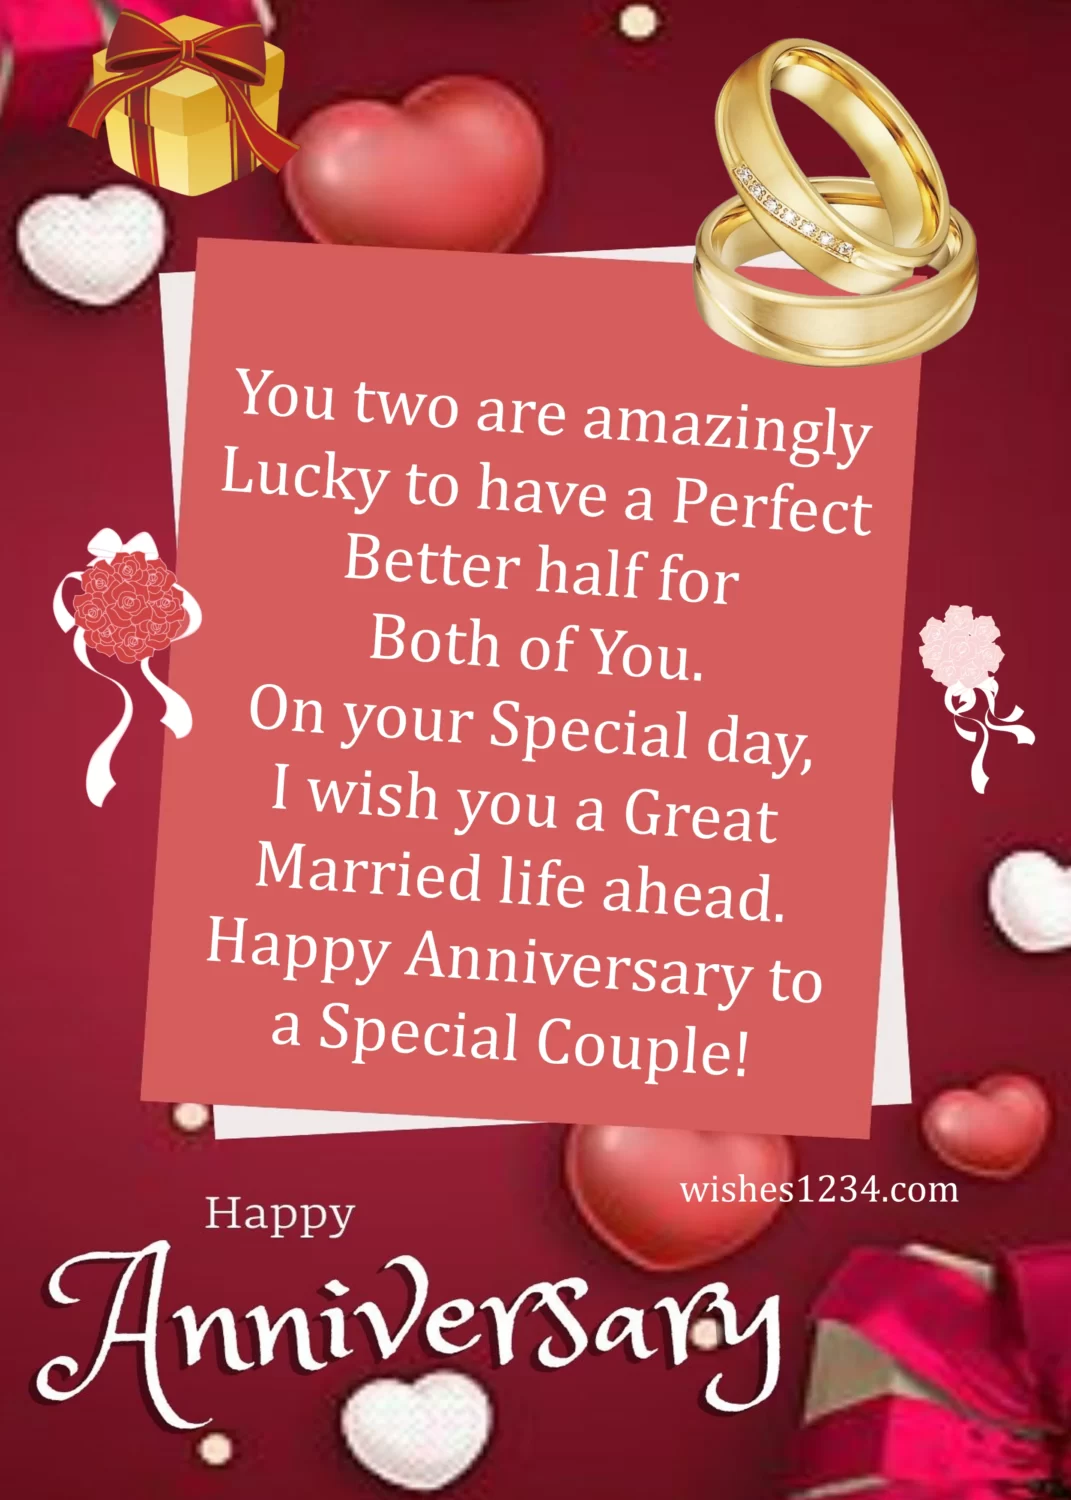 Happy anniversary greetings with card, Happy Wedding Anniversary.